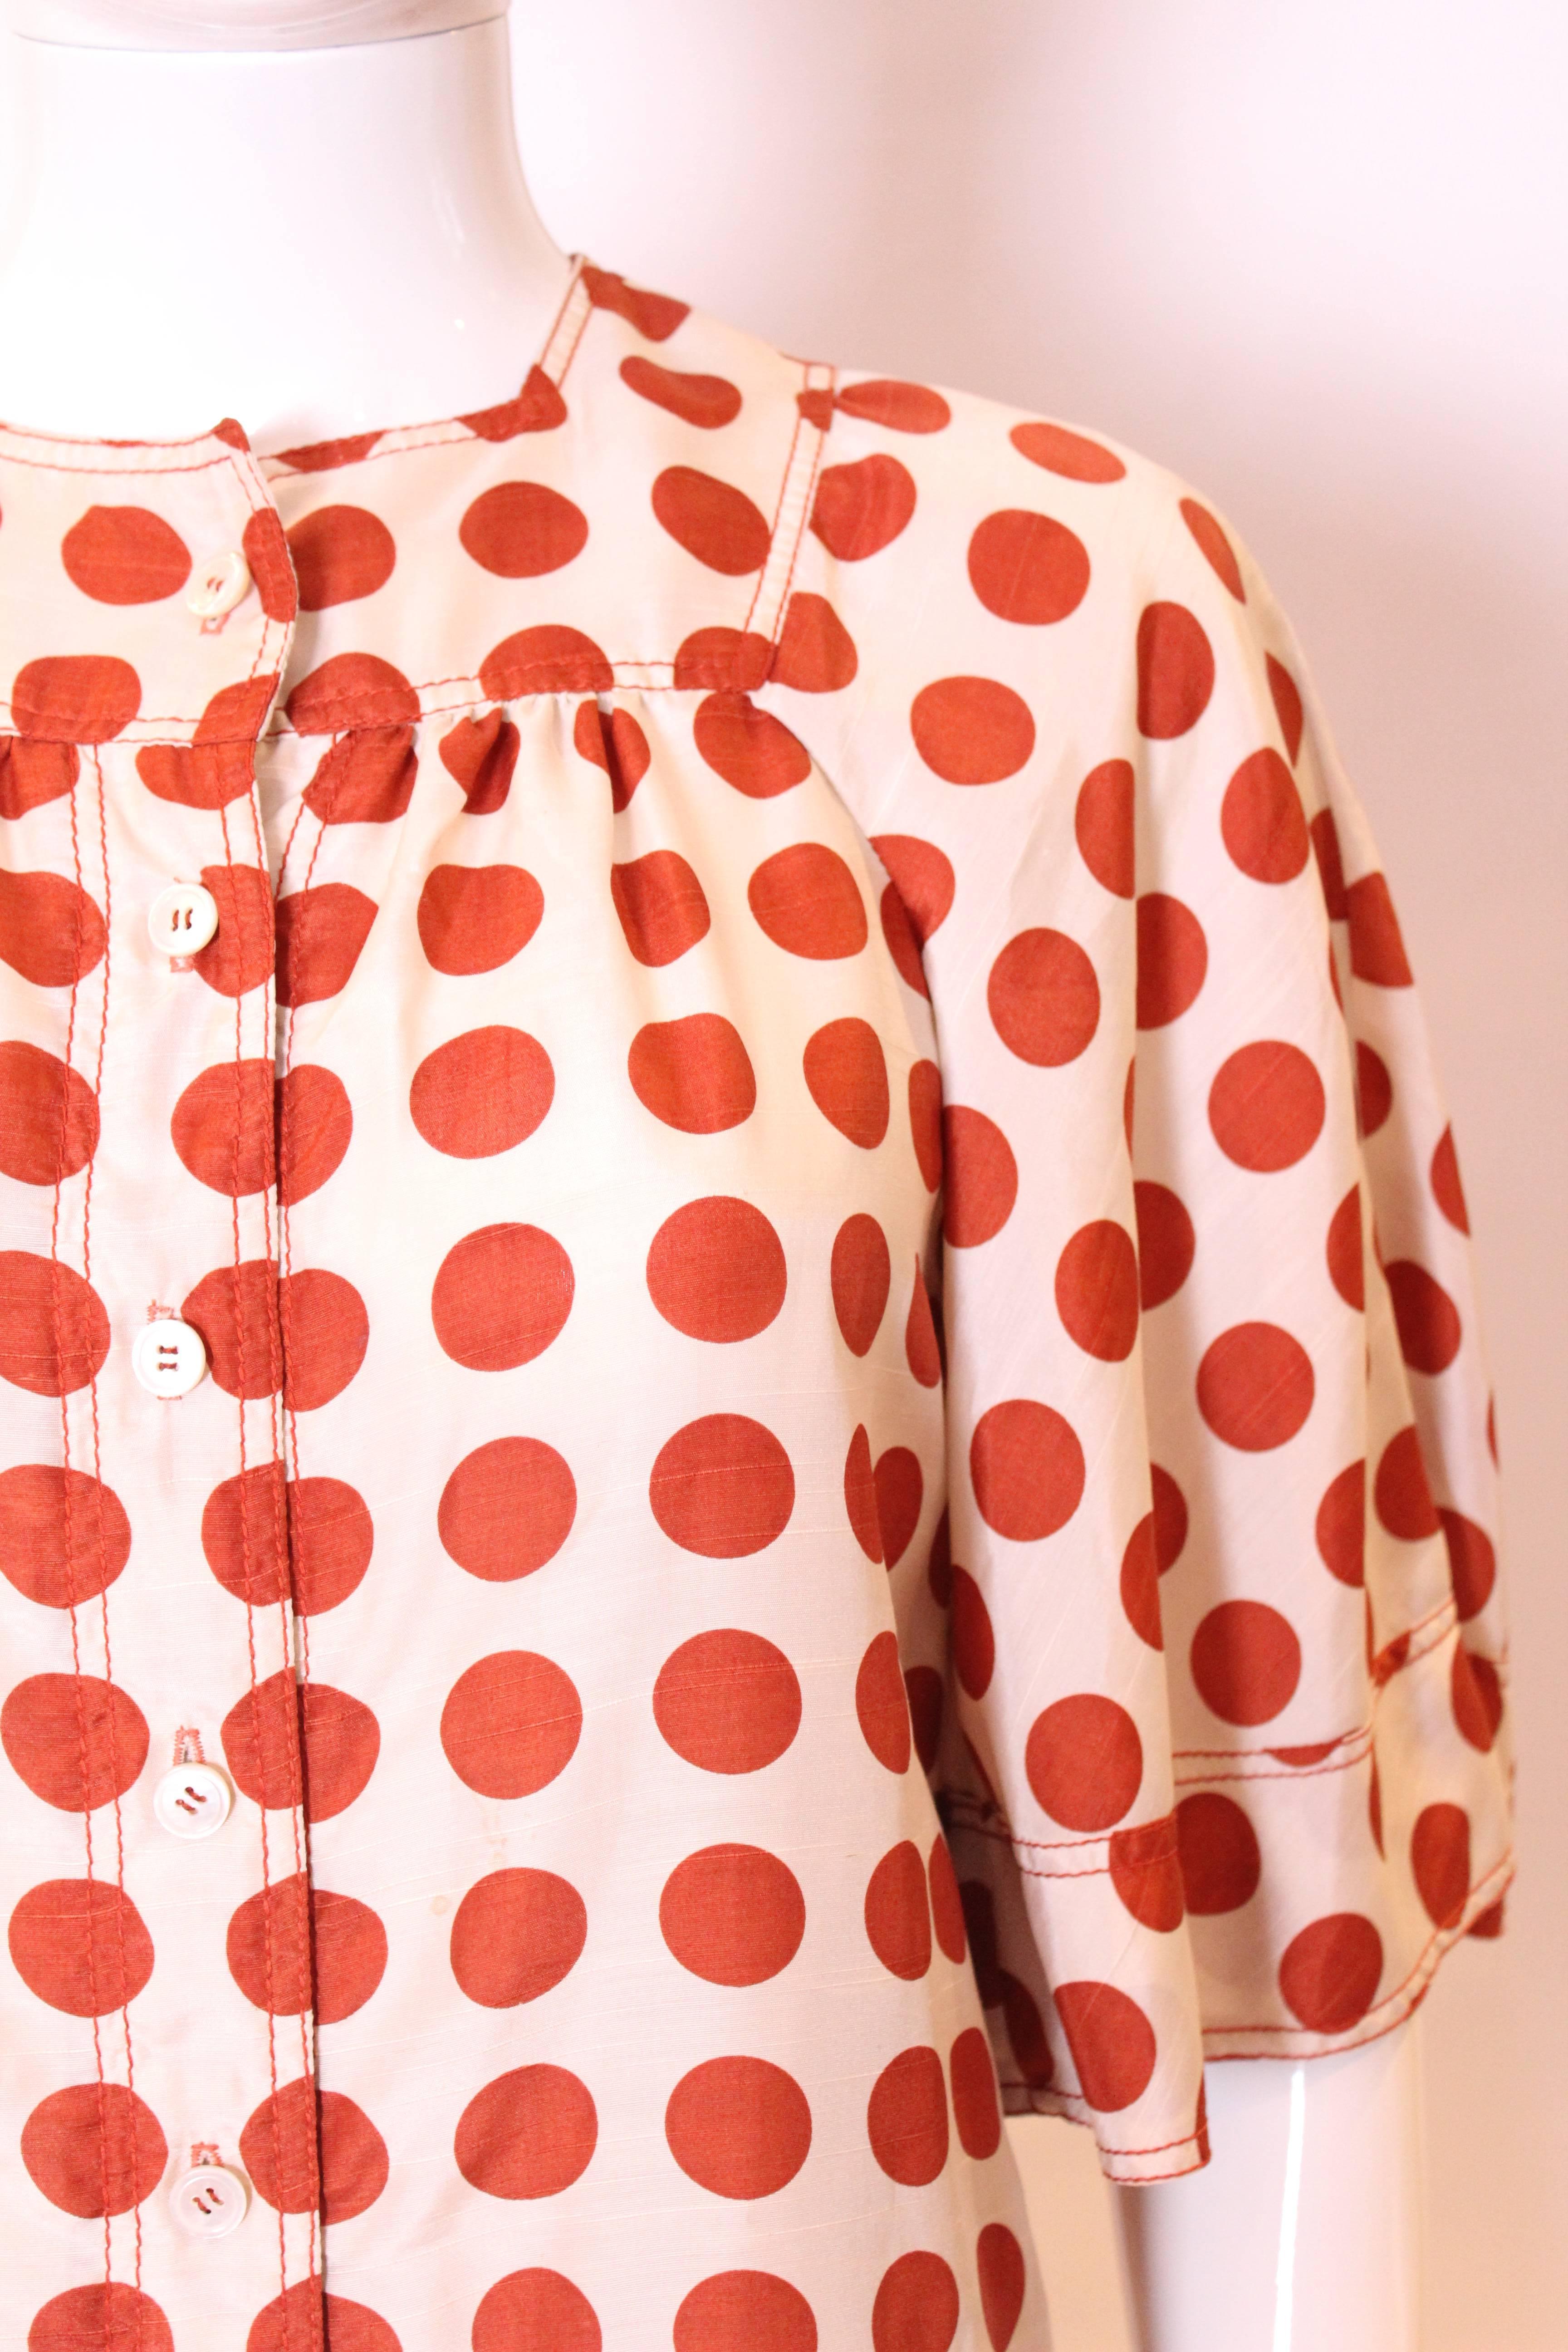 Jean Muir Silk Polka Dot Dress In Excellent Condition For Sale In London, GB